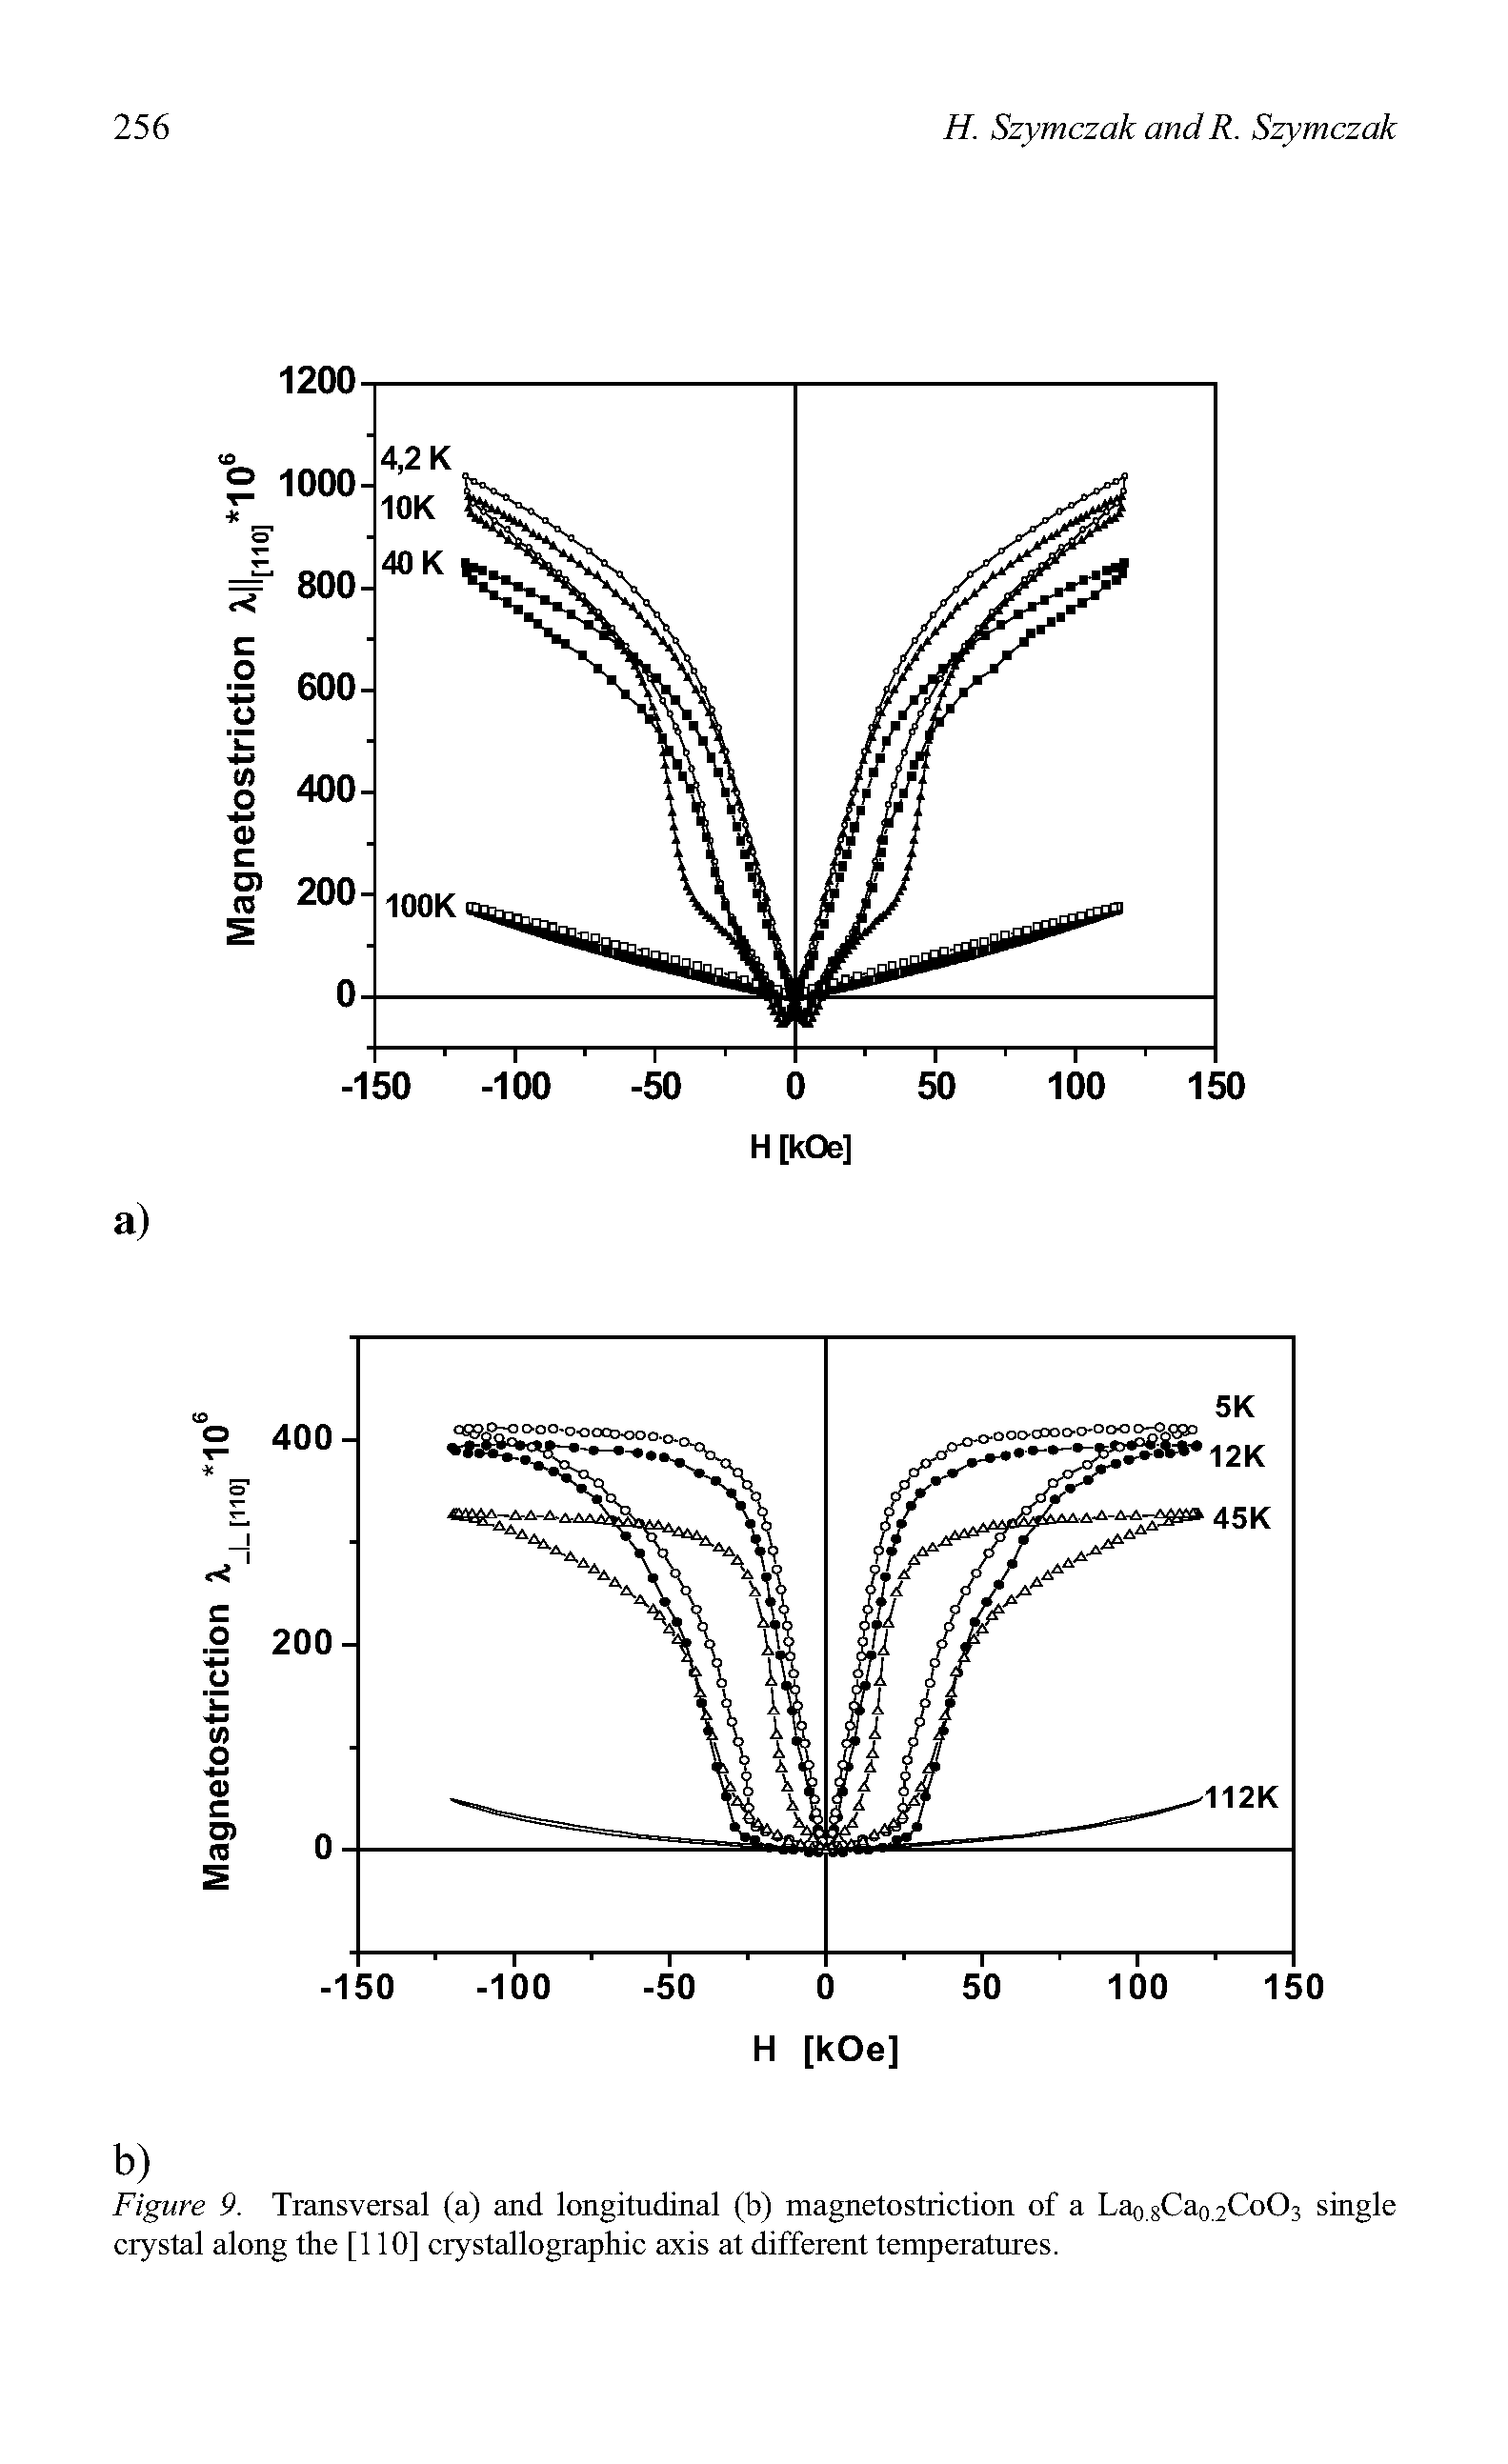 Figure 9. Transversal (a) and longitudinal (b) magnetostriction of a Lao 8Ca0.2CoO3 single crystal along the [110] crystallographic axis at different temperatures.